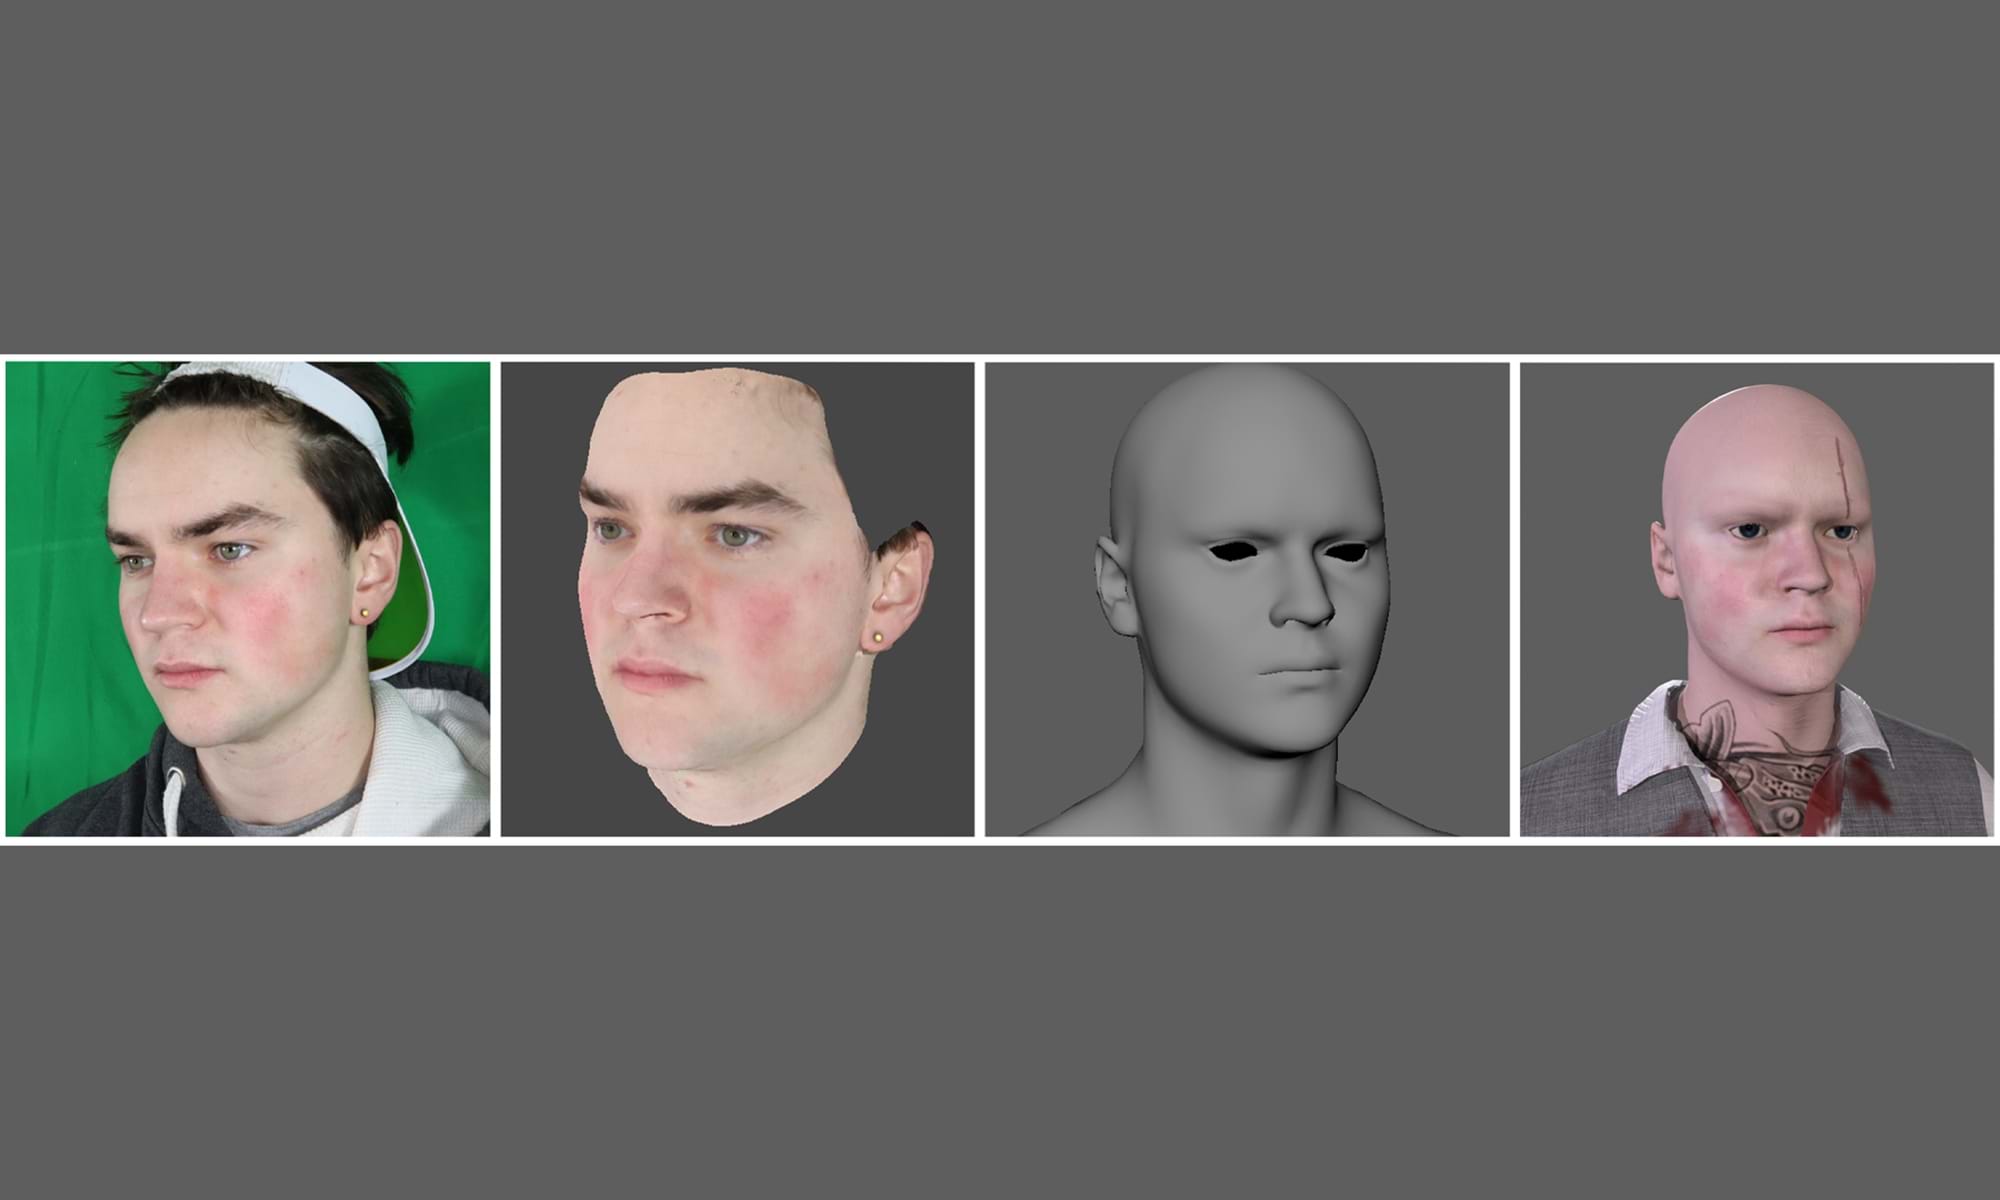 "Conquering the Uncanny Valley Using Photogrammetry" is a 2022 Digital Graduate Show project by Stuart McQuade, a Computer Arts student at Abertay University. 